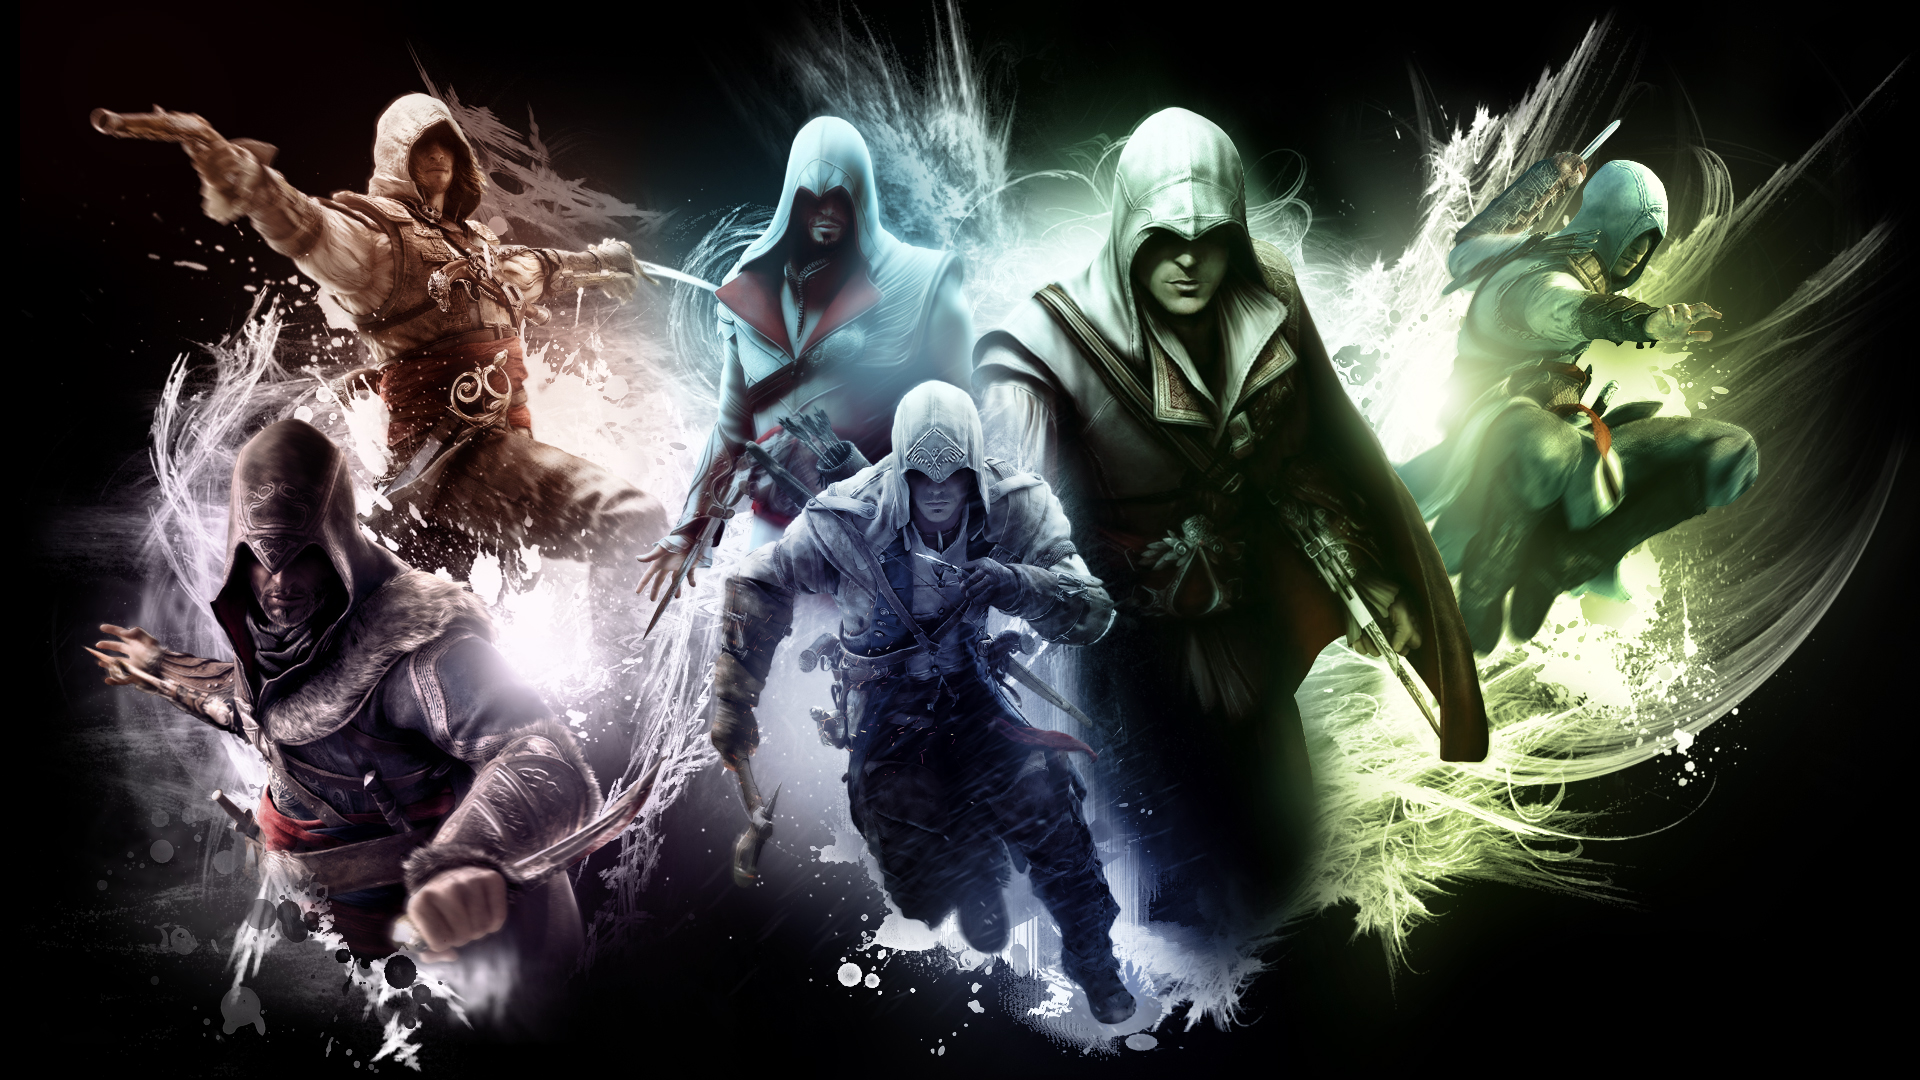 assassin creed hd wallpapers 1080p,cg artwork,action adventure game,darkness,graphic design,fictional character